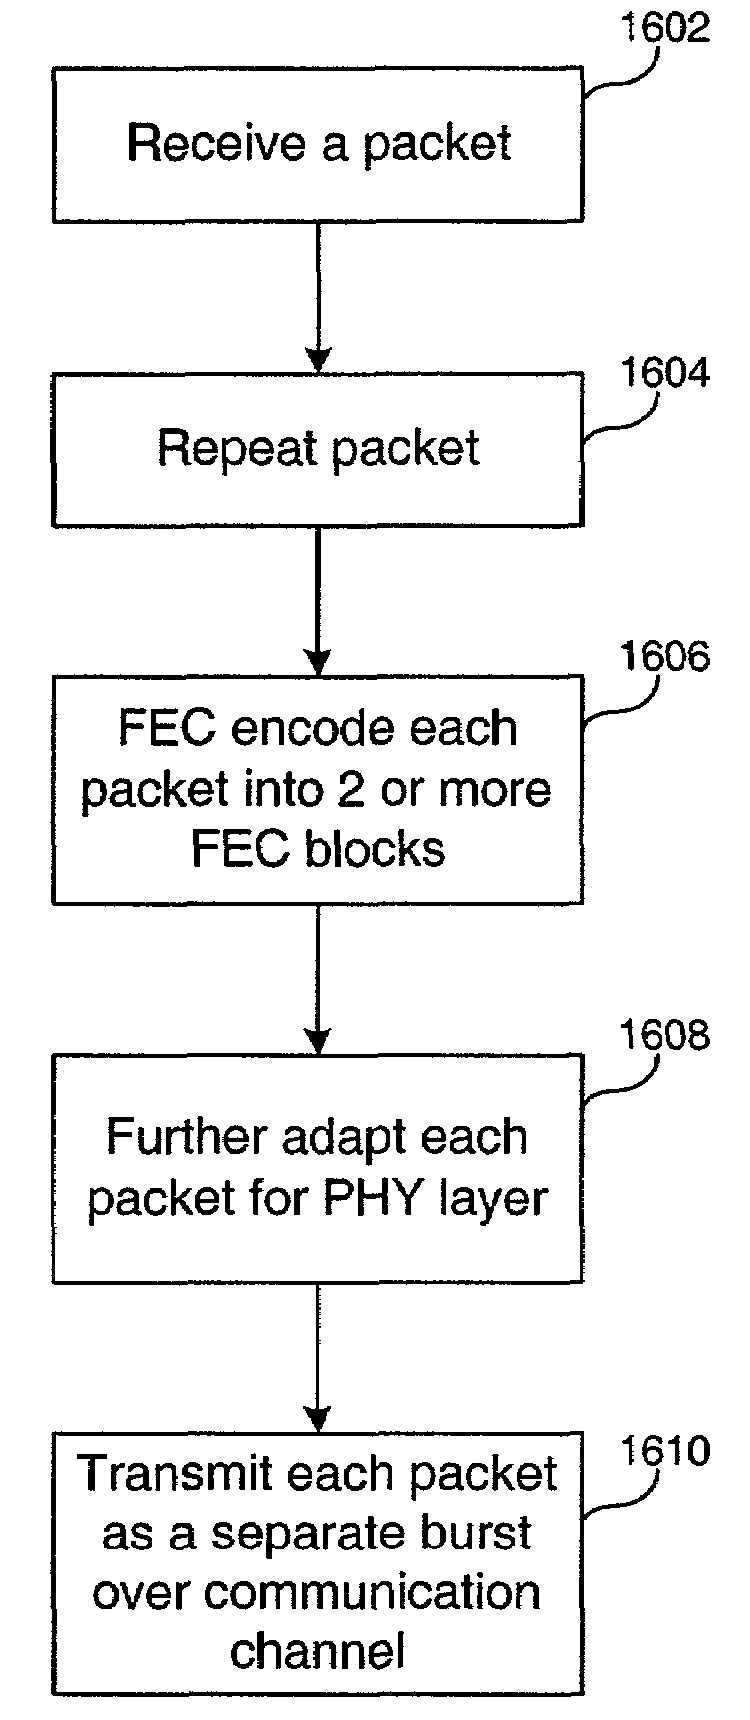 System, method and computer program product for mitigating burst noise in a communications system